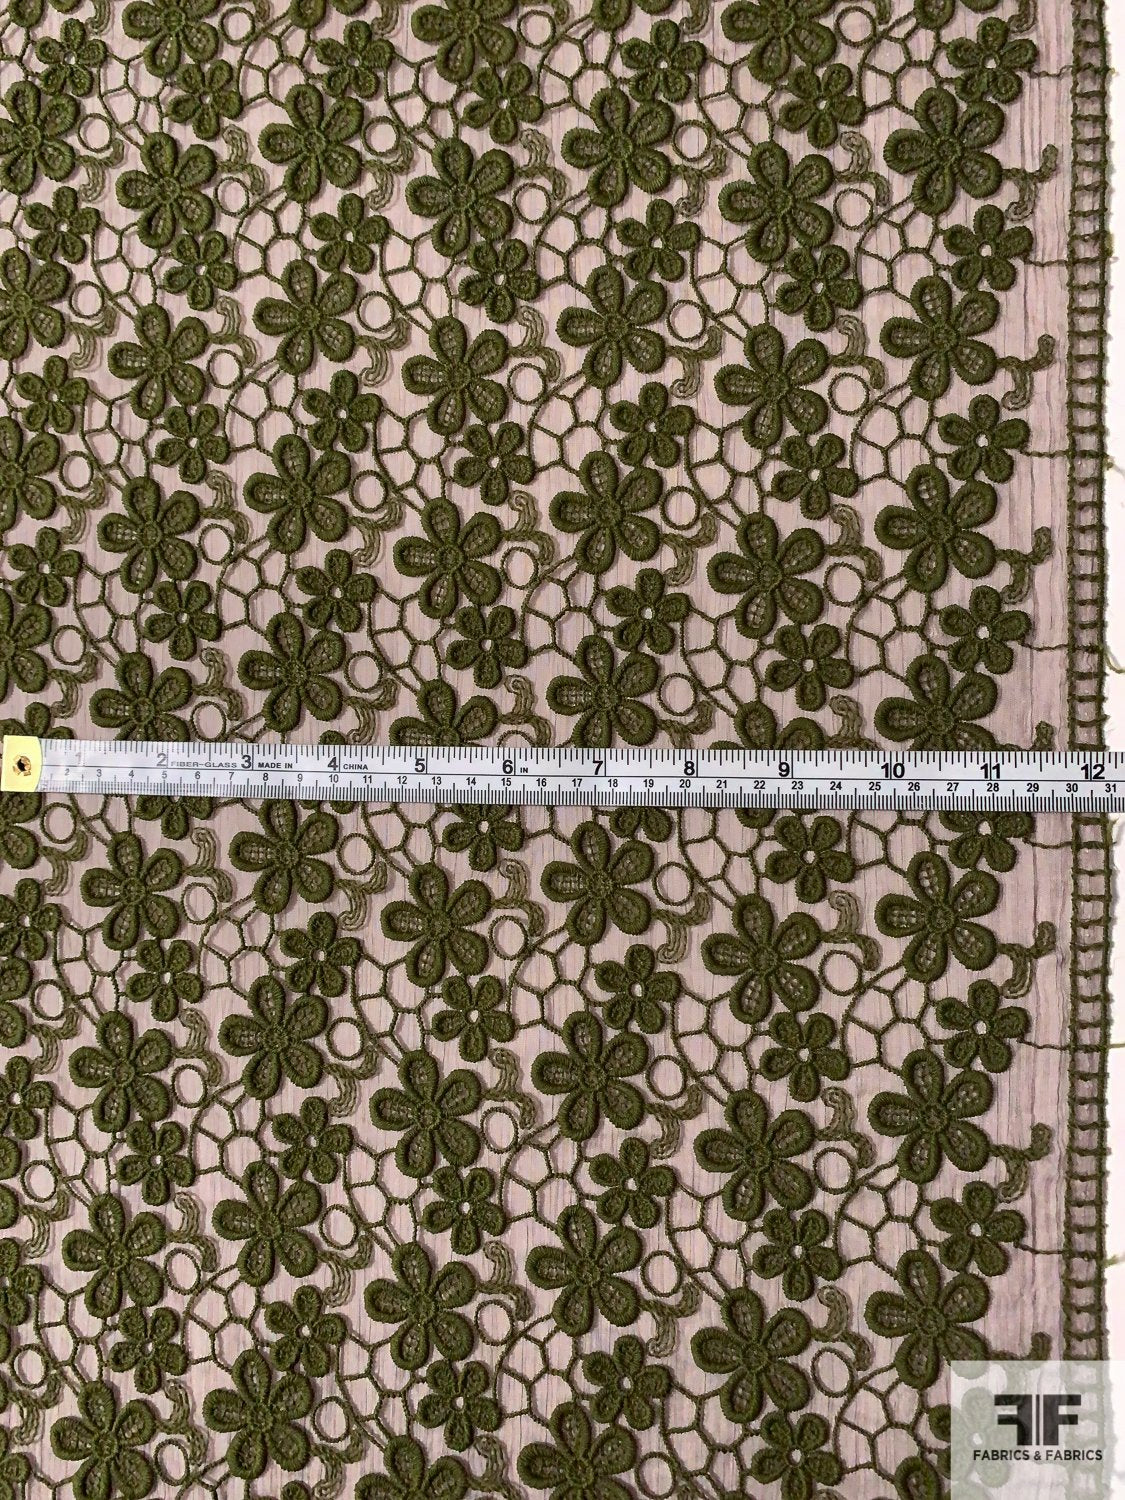 Floral Embroidery on Crinkled Chiffon - Olive Green / Dark Taupe